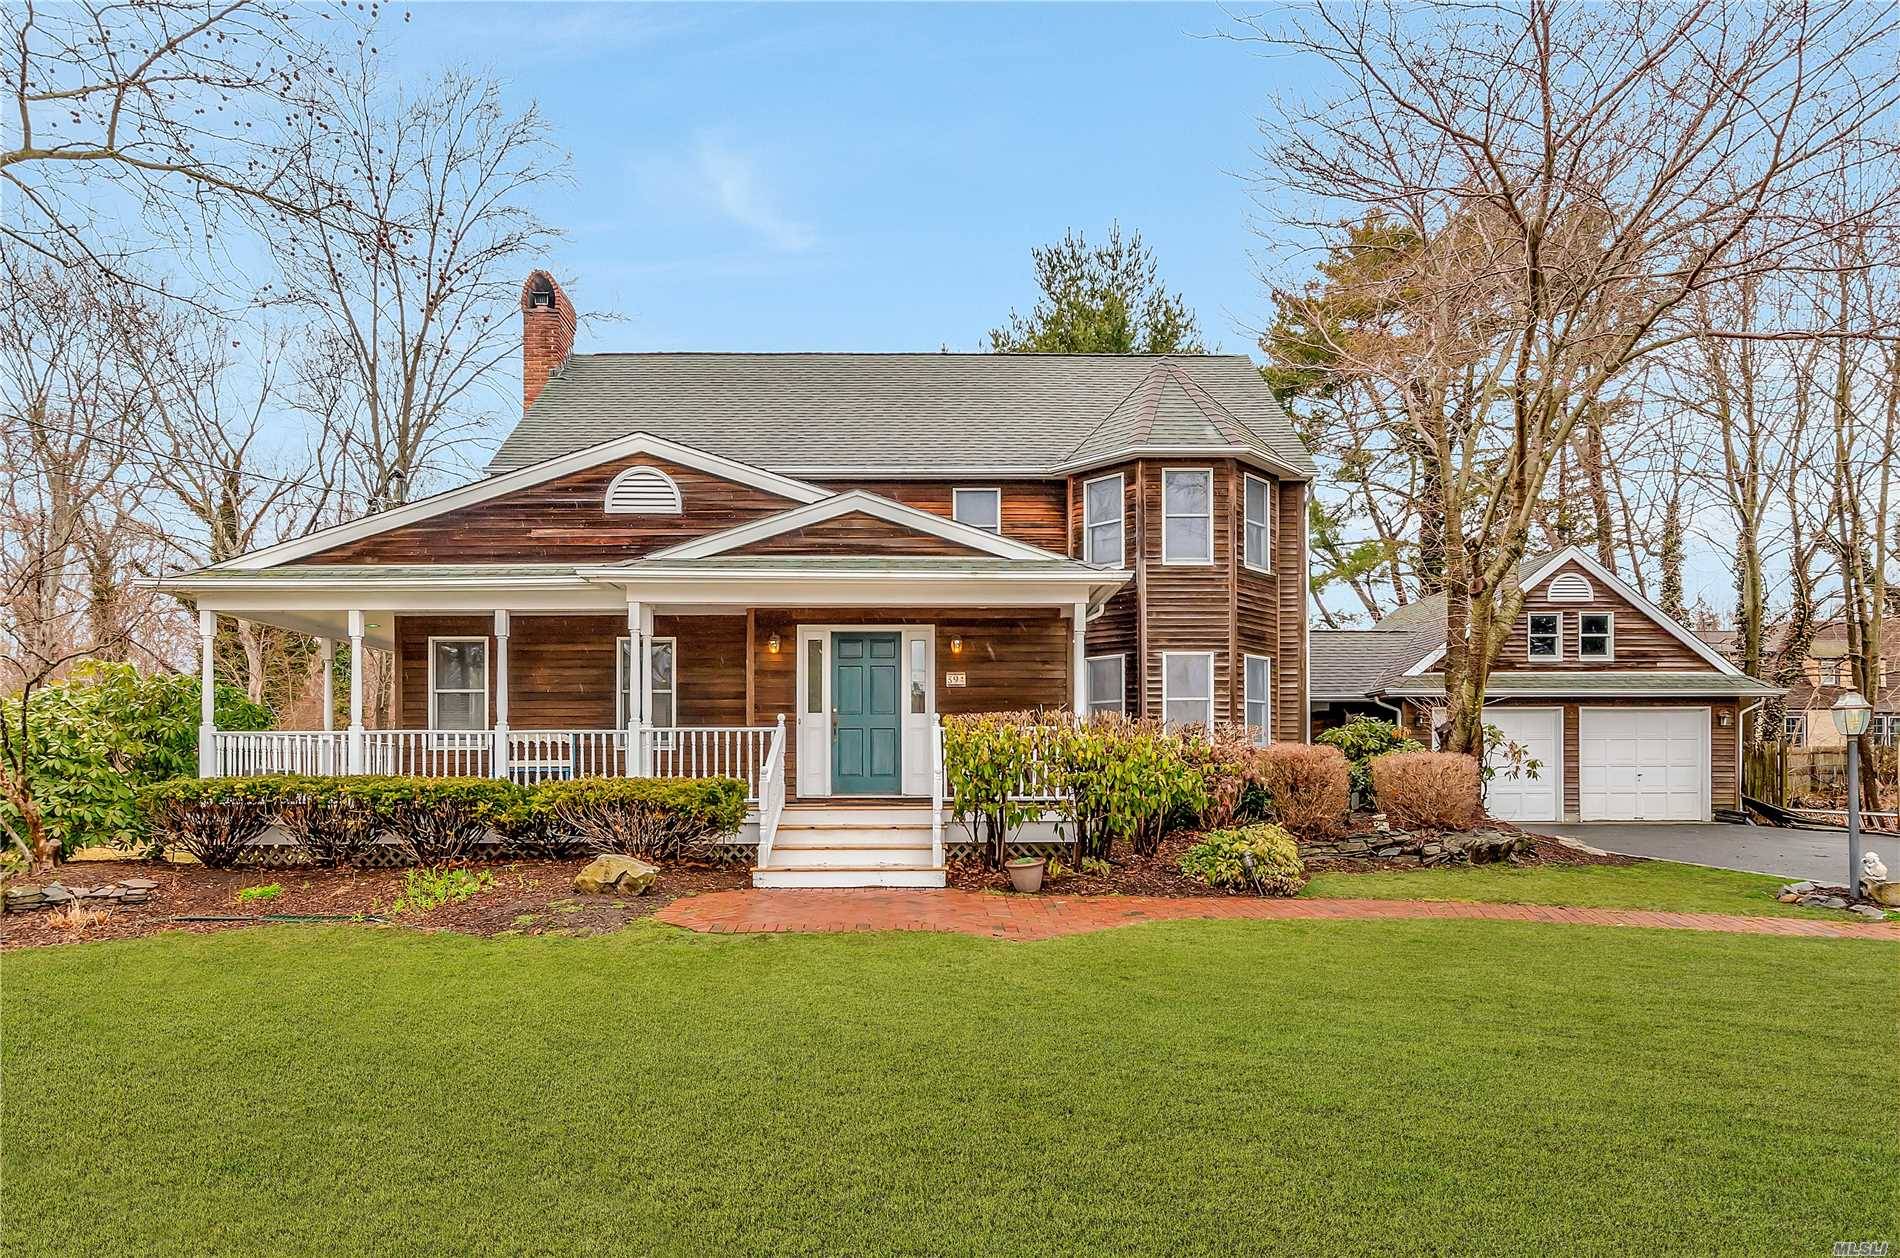 Some Photos Virtually Staged Immaculate Maintained Home Nestled in the Idle Hour Area featuring an Expansive Wrap A Round Porch.